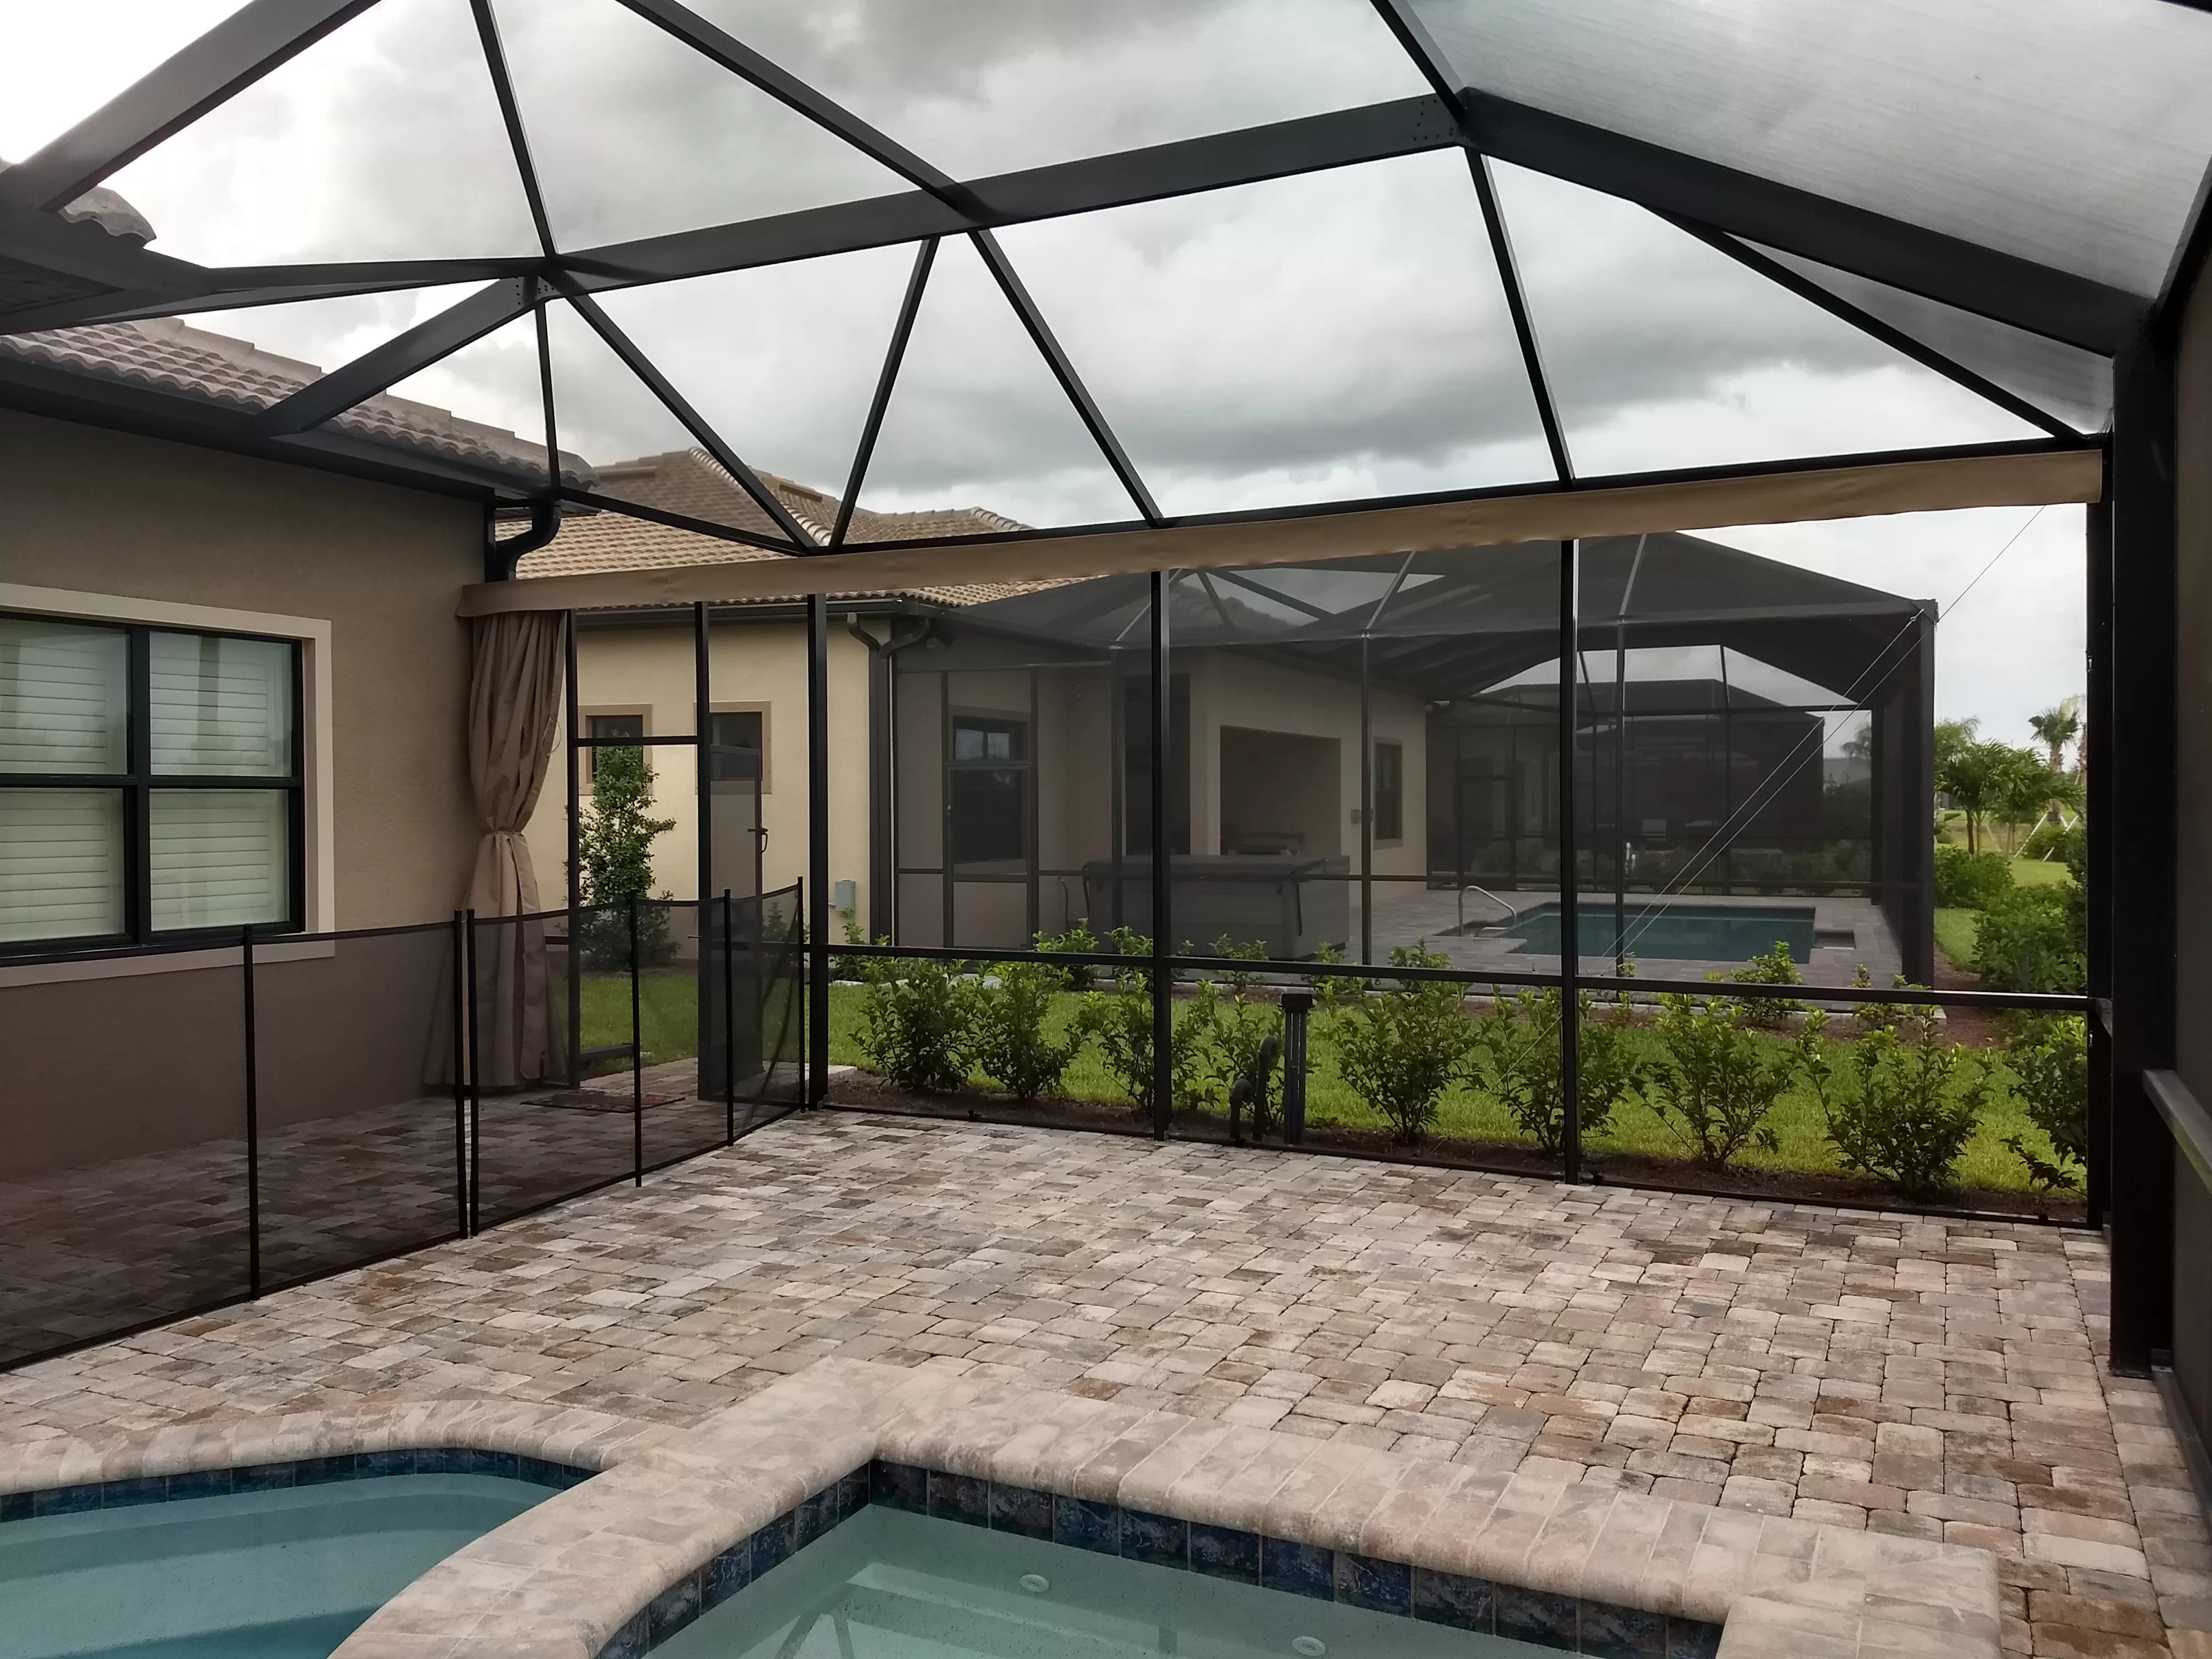 A beautiful screen enclosure covered a pool and patio area.